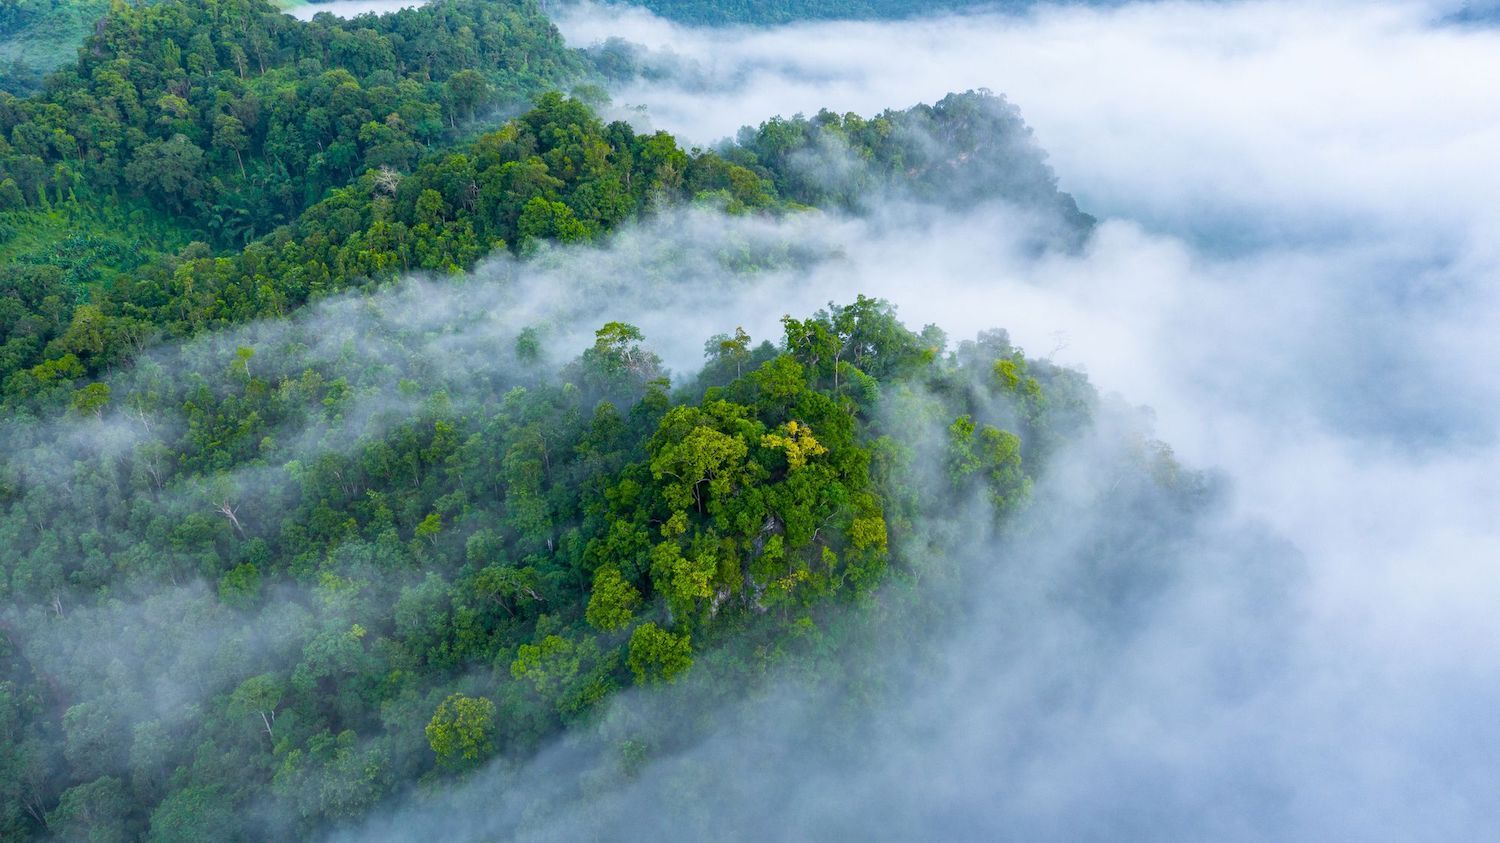 Mist descends over a mountainous forest, full of lush greenery.